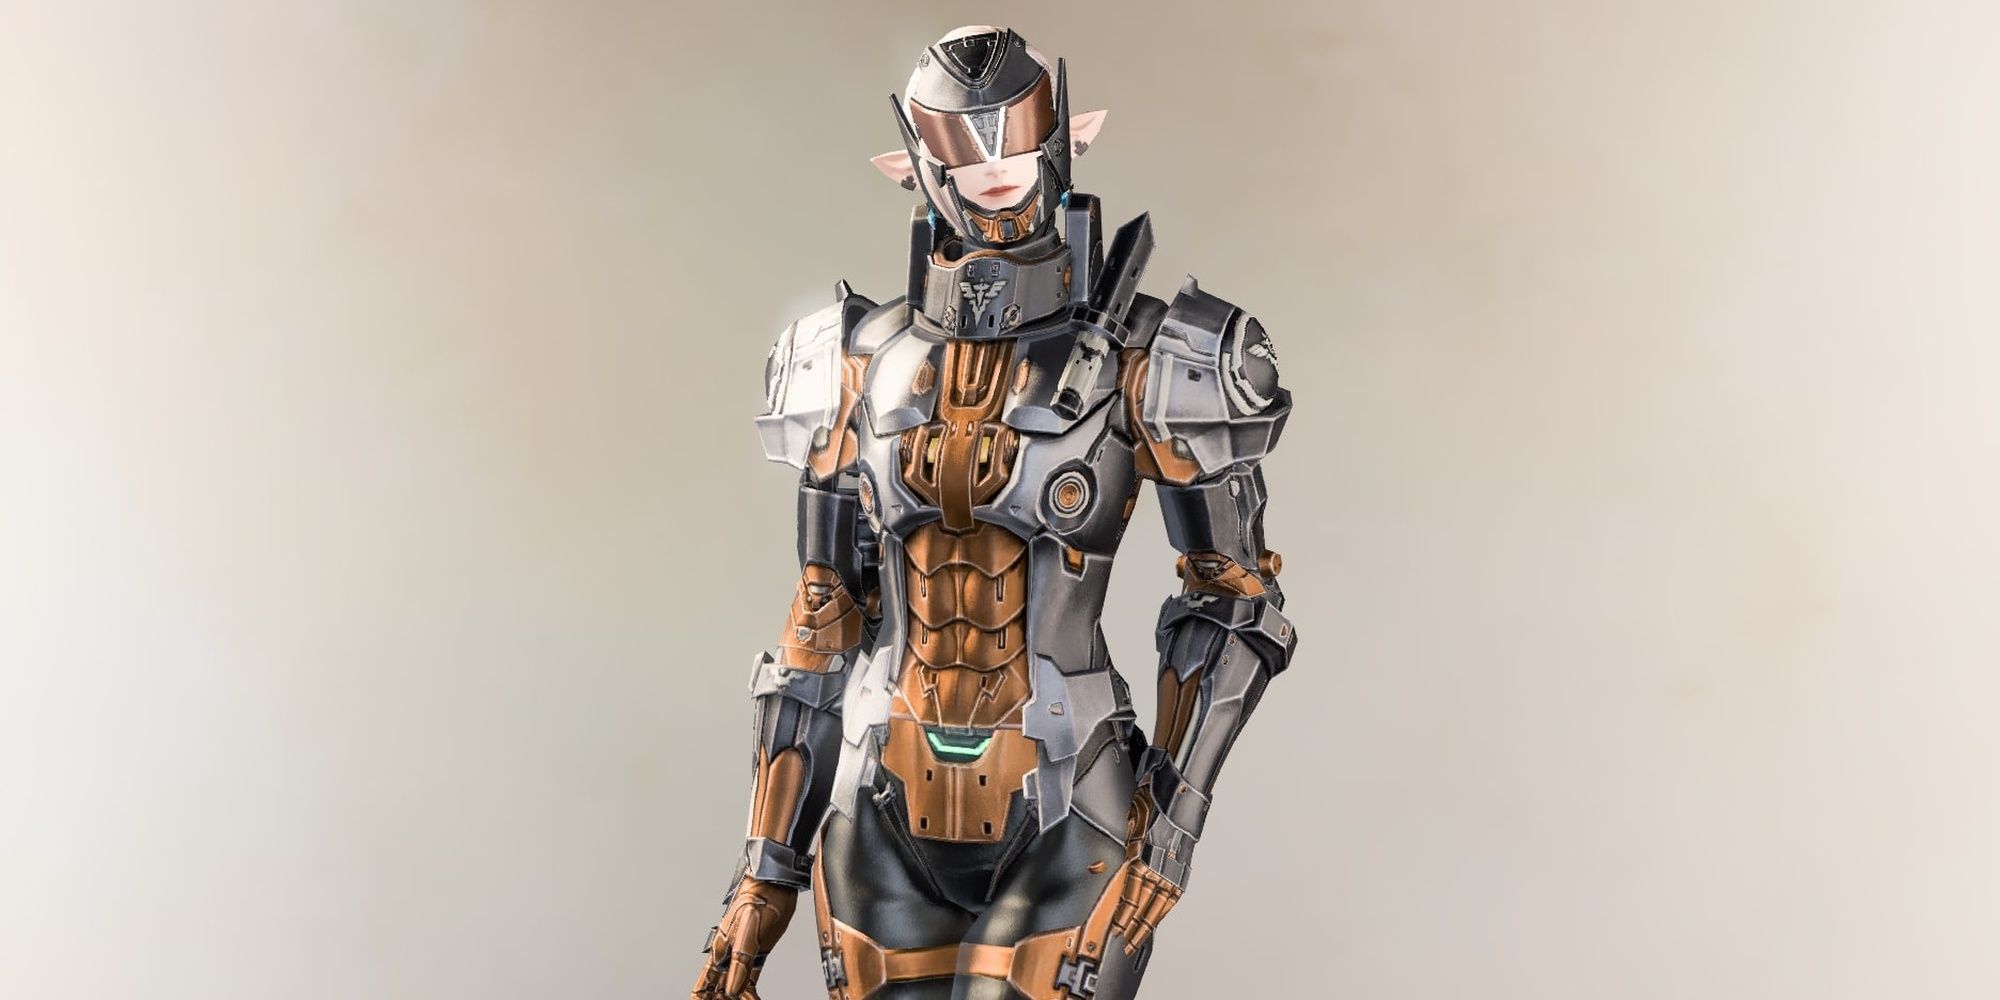 Final Fantasy 14 Elezen Character in Late Allagan Armor Against an Off-White Background